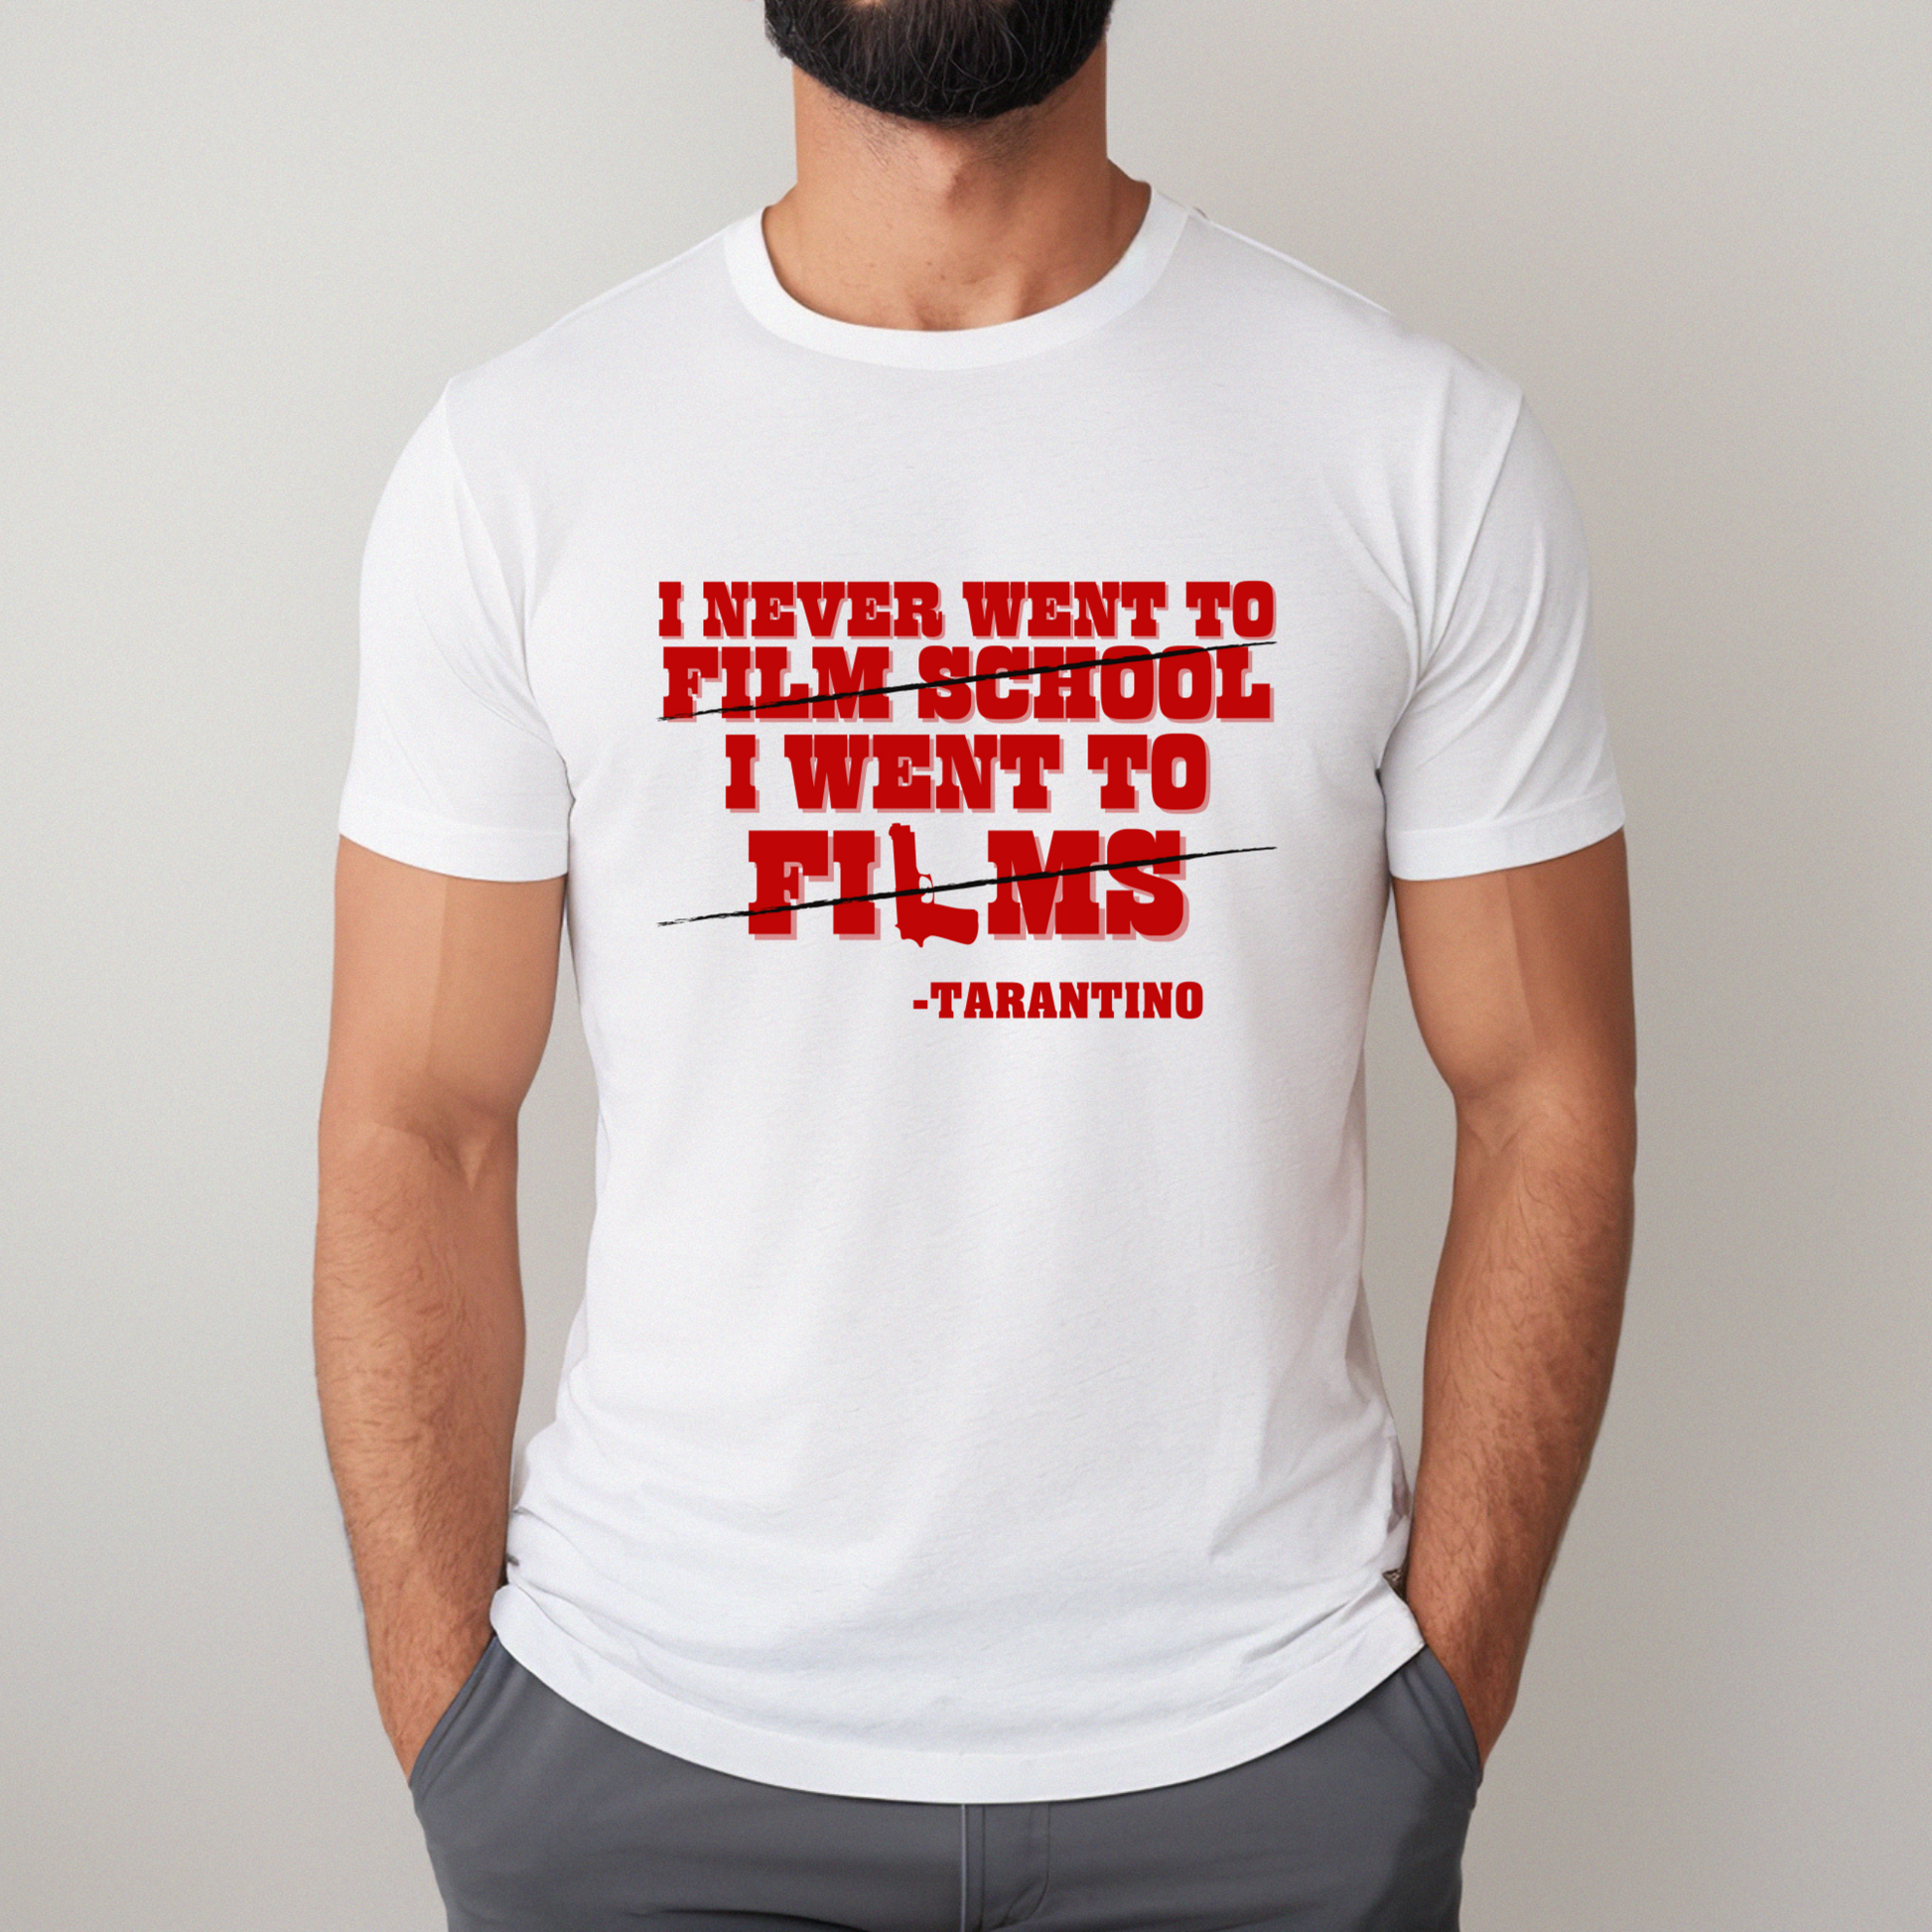 I Never Went to Film School Essential Printed T-Shirt Looper Tees